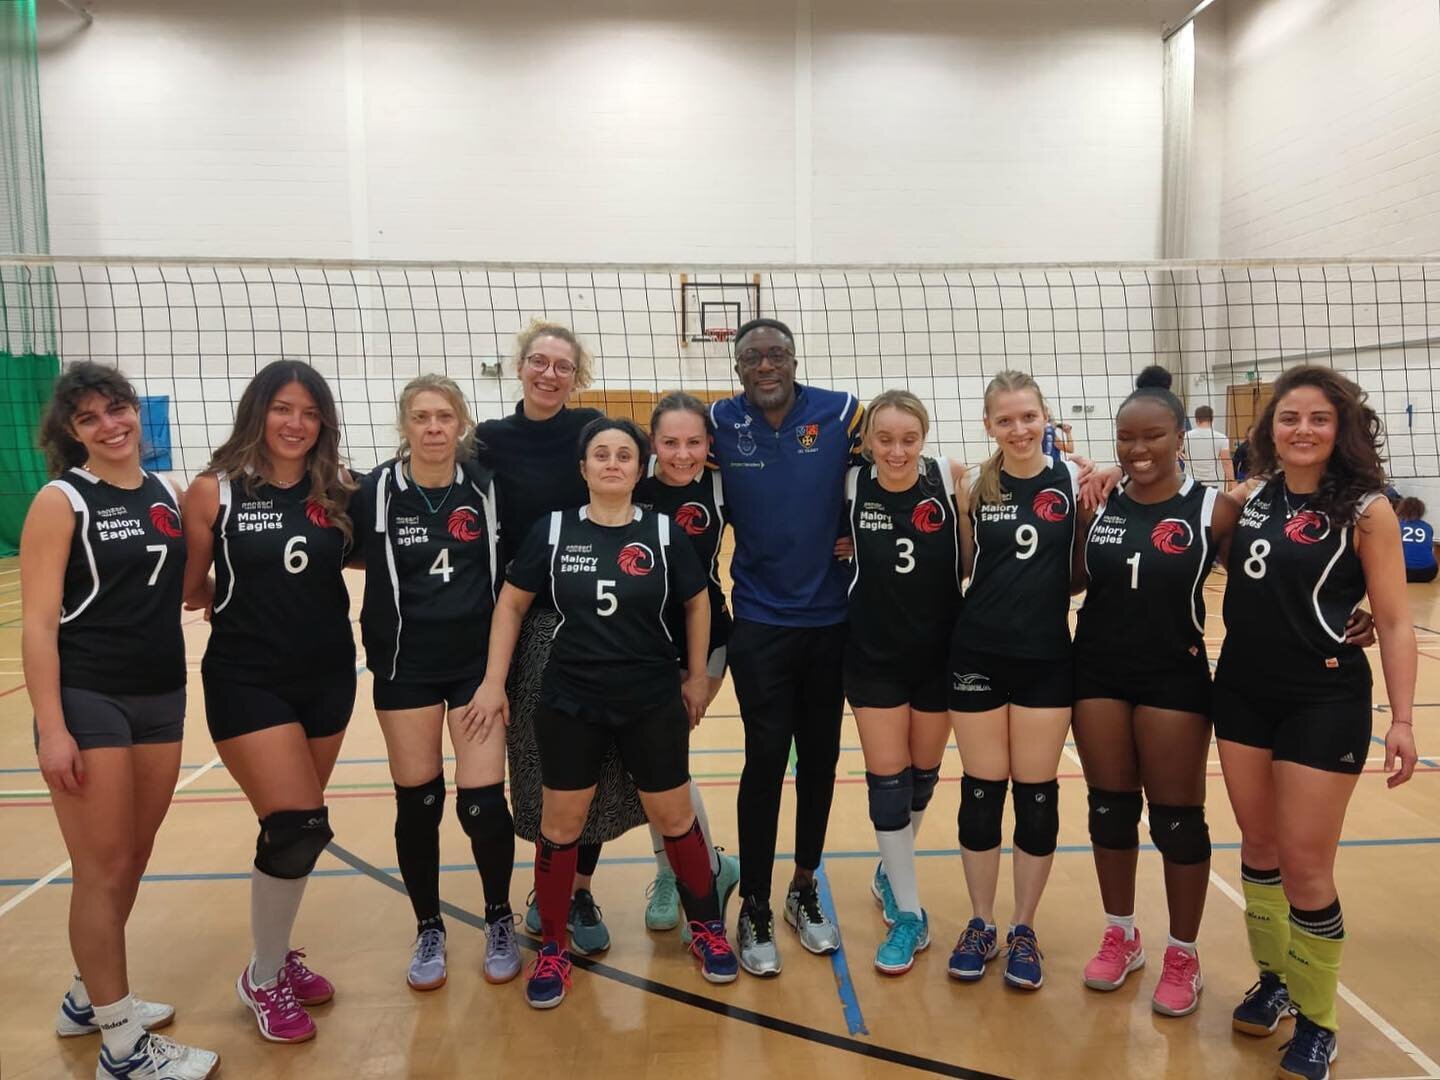 Big congrats to our Malory Eagles Red!

They gave it all at their last game against @flamingsixvolleyball Cobras and finished the season in the 4th position! Although they have been through lots of injuries from their team, they have stayed strong an